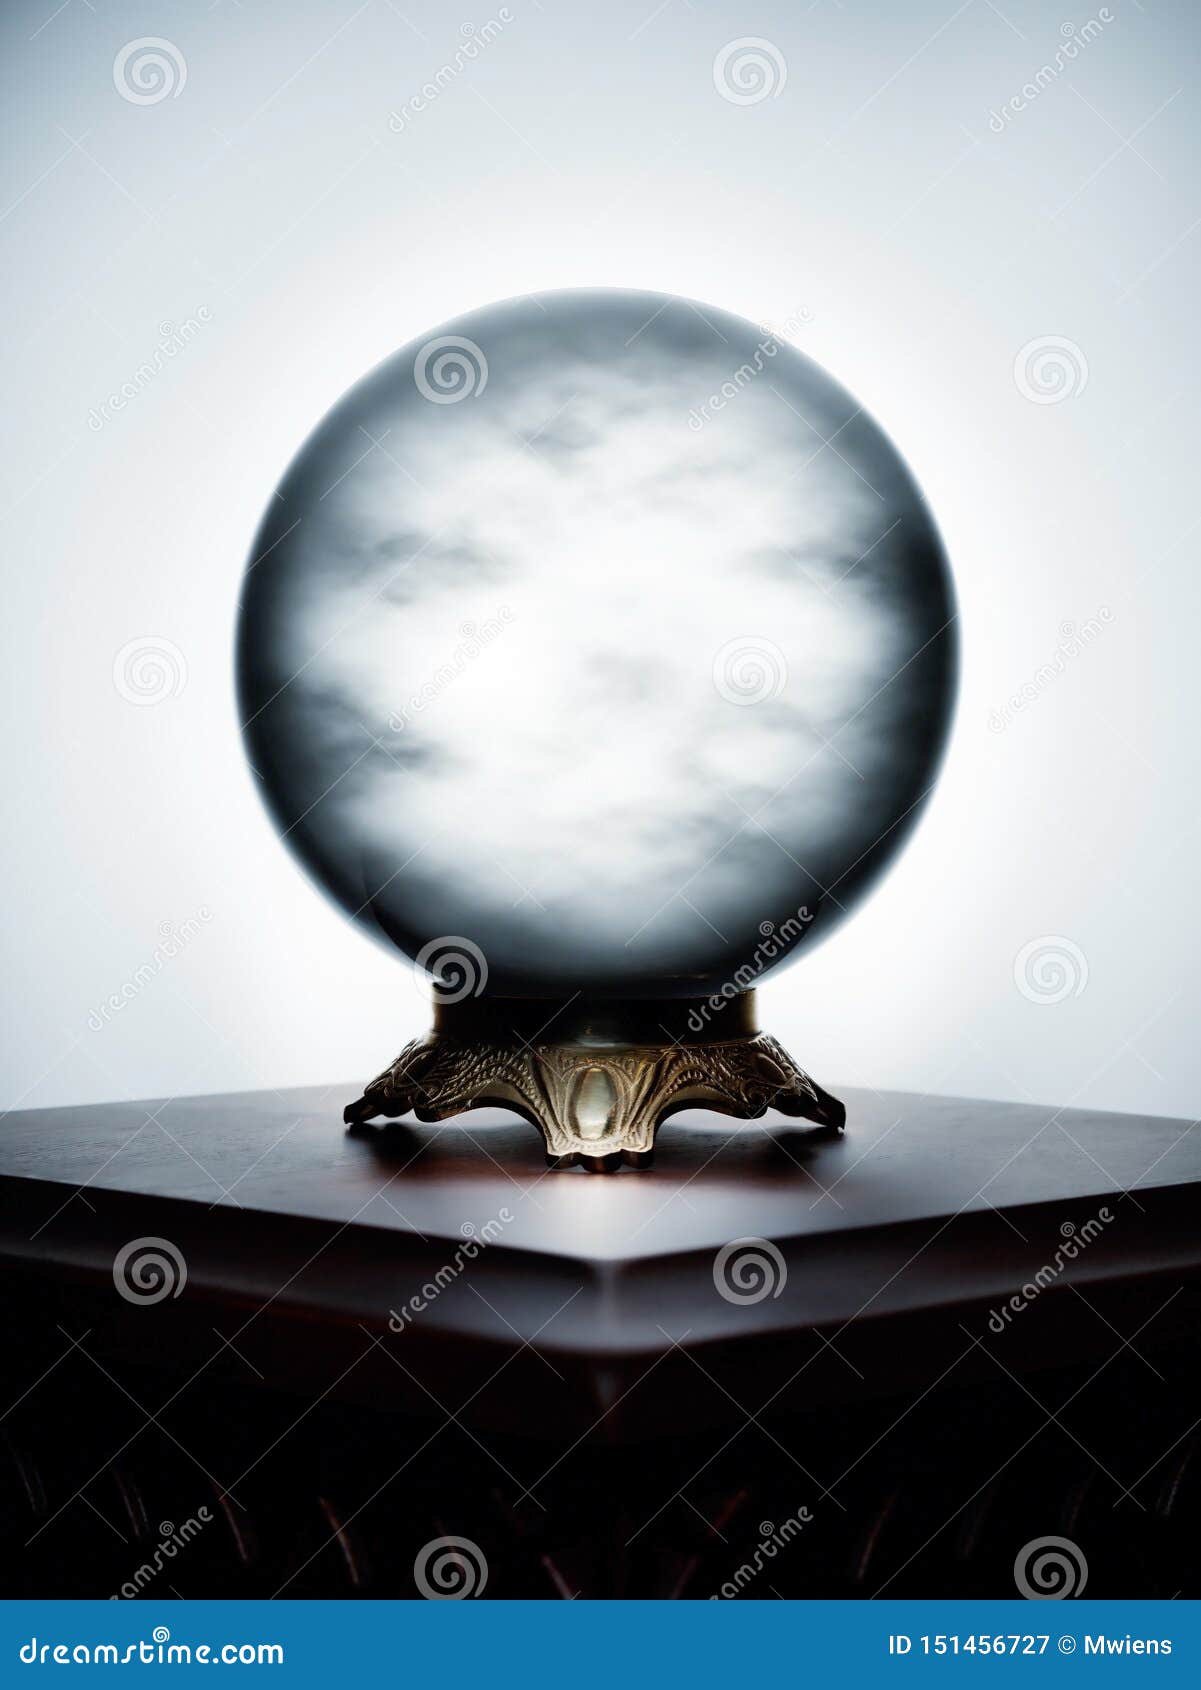 crystal-ball-clouds-obscuring-future-fortune-teller-s-predictions-love-wealth-health-obscured-cloudy-151456727.jpg